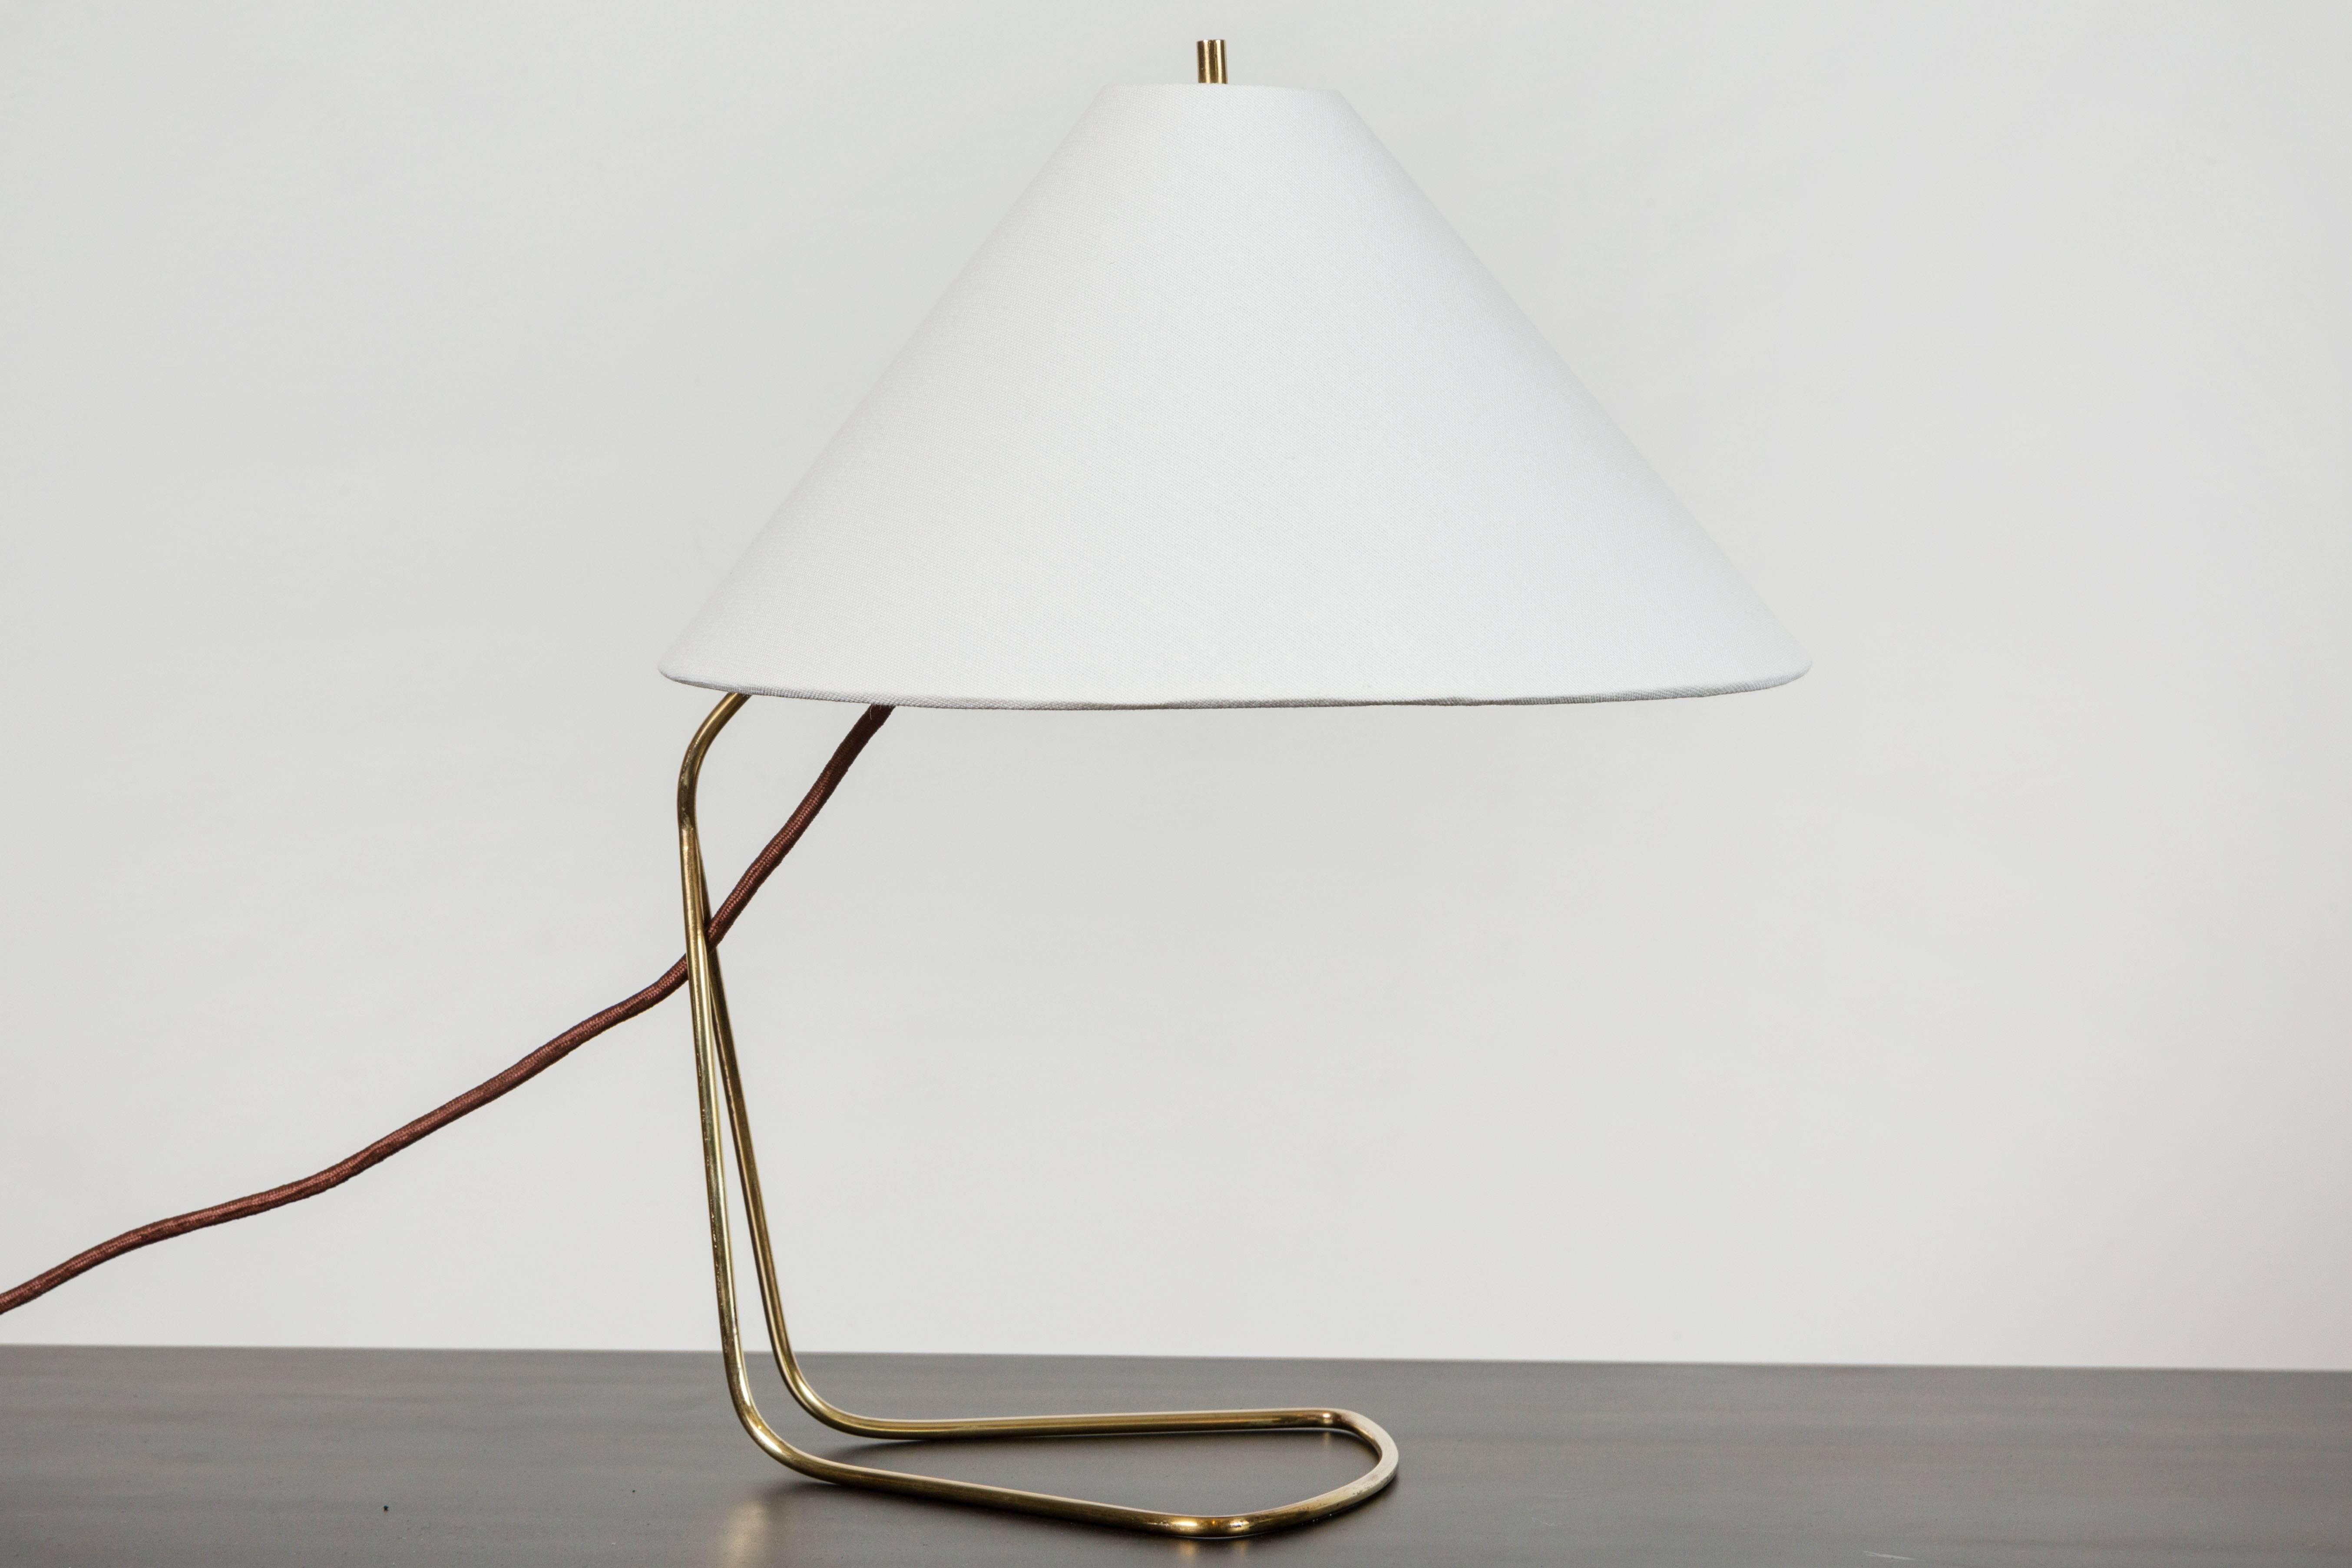 Pair of Austrian brass table lamps by J.T Kalamar. Shade pivots on a hinge to make them wall-mounted.